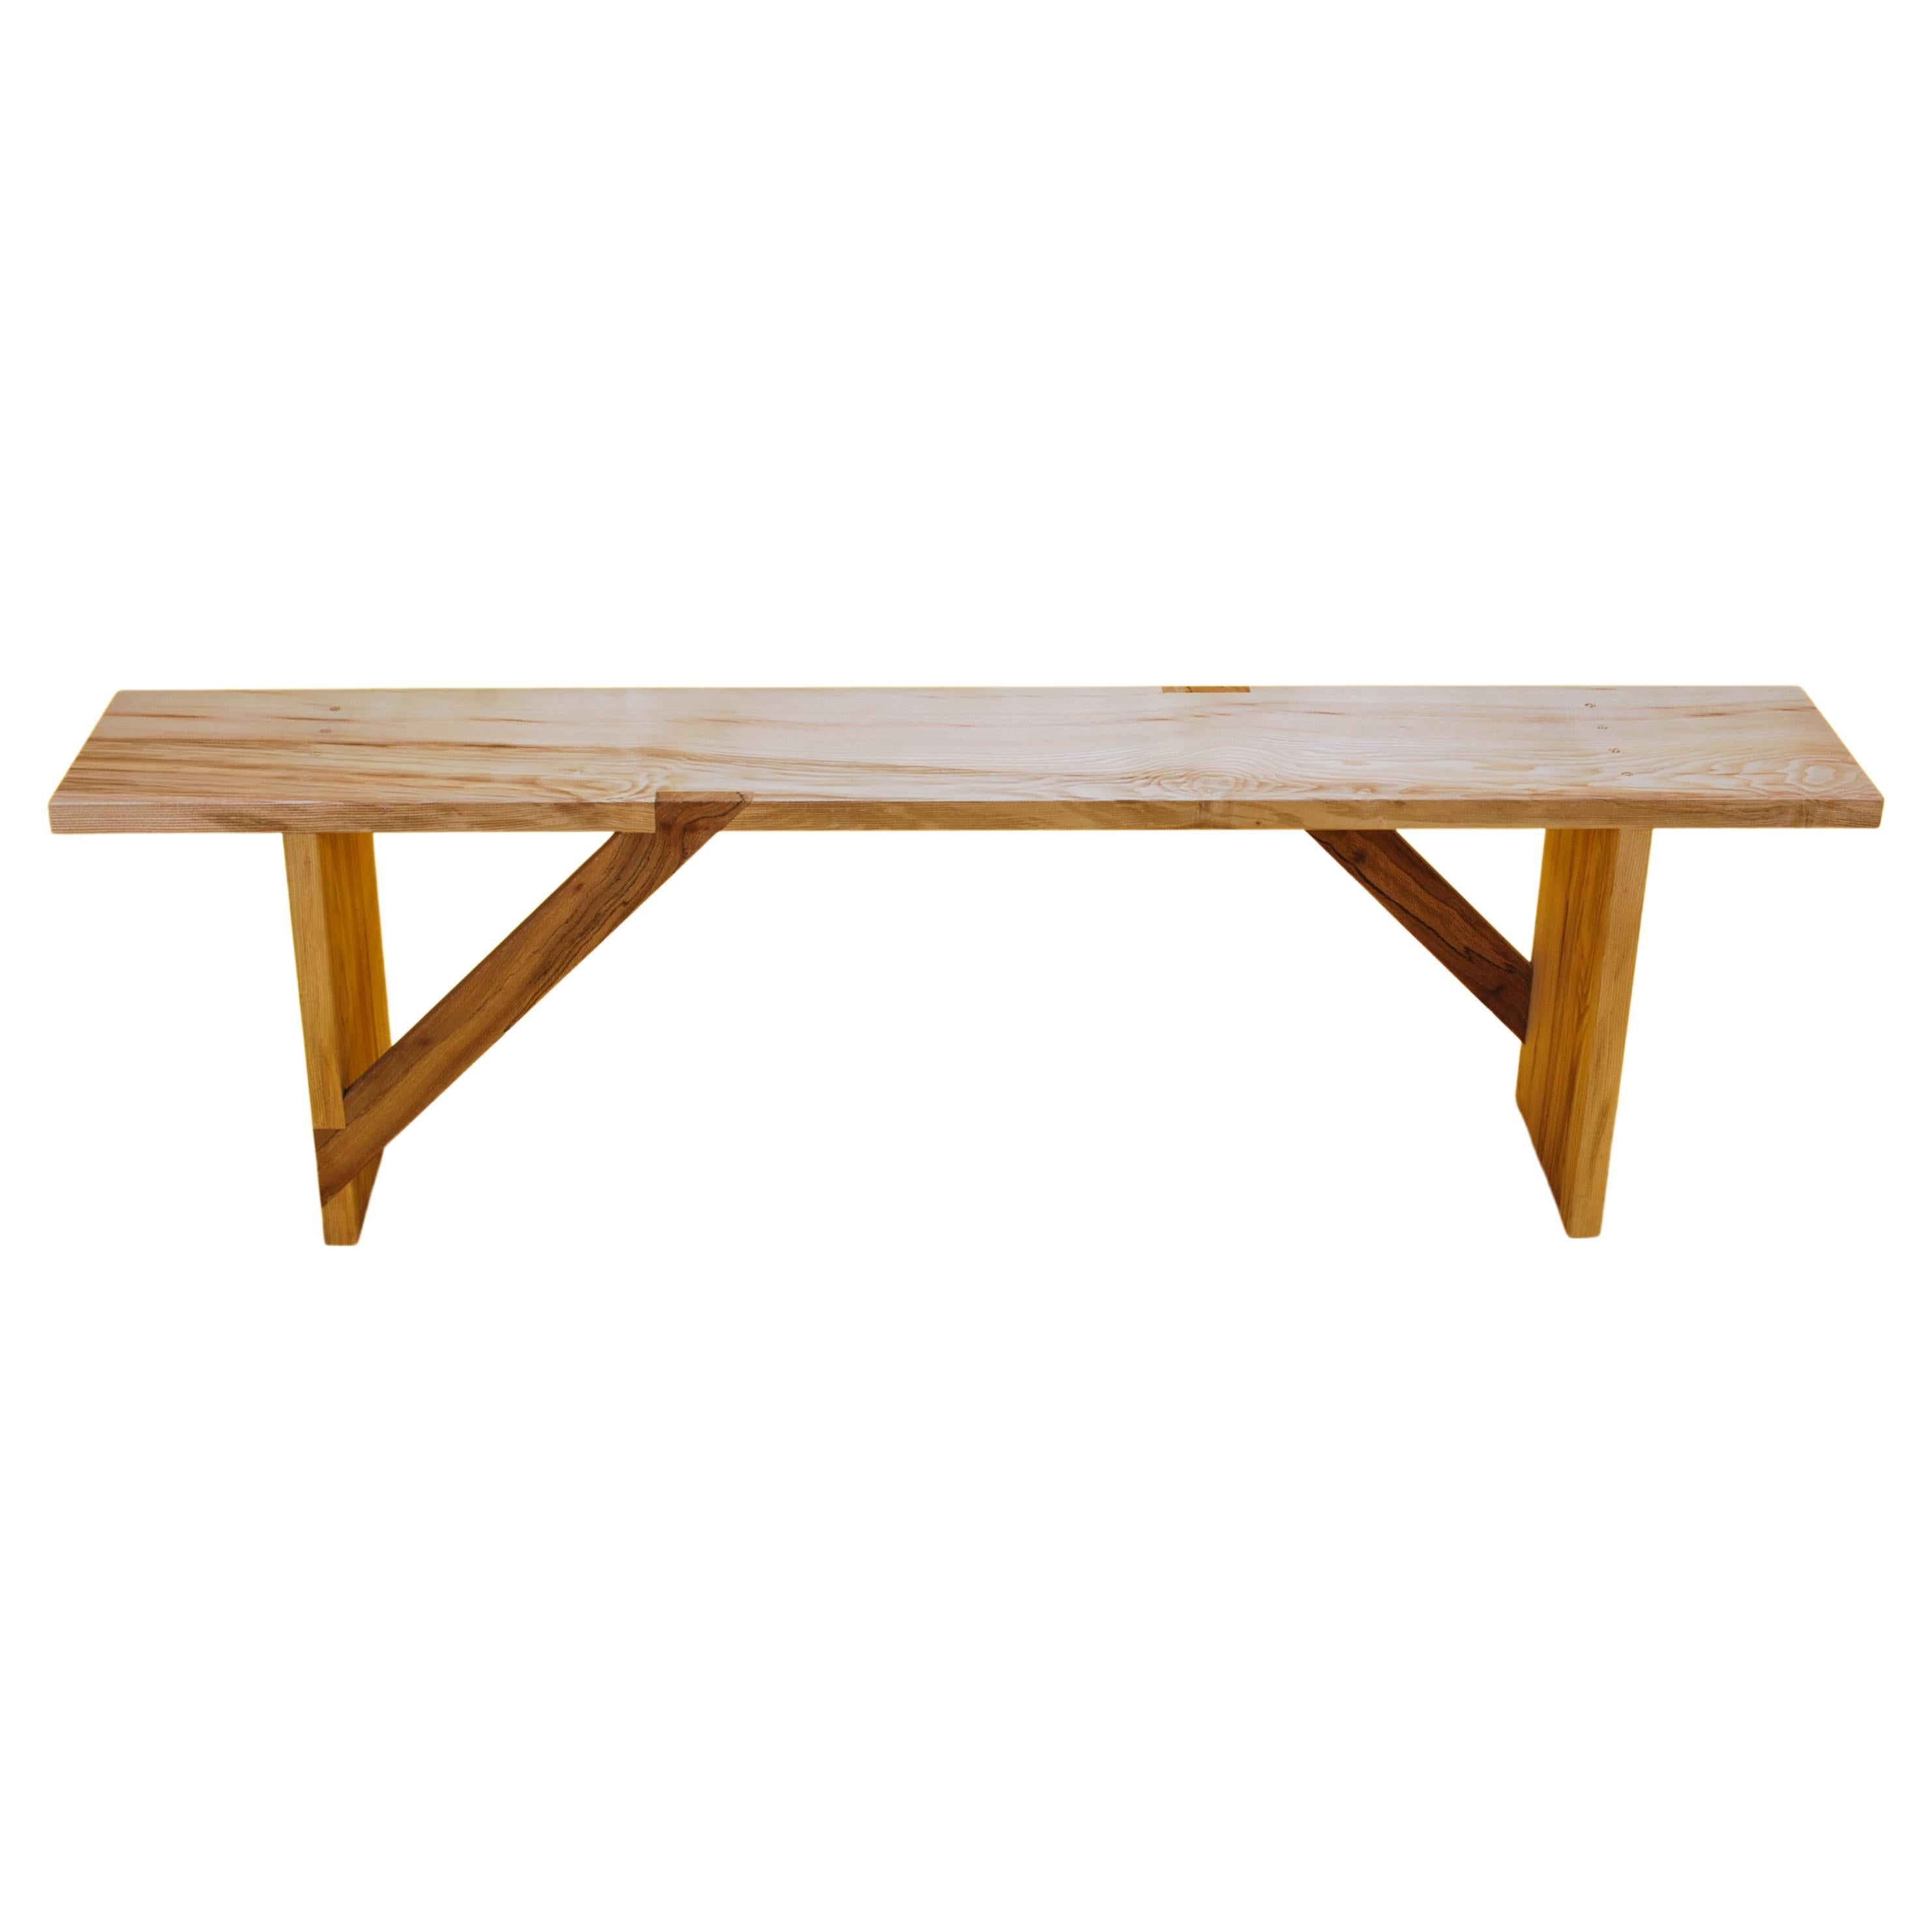 Bench in Solid English Ash and London Plane Wood Handmade in the UK Seats Three